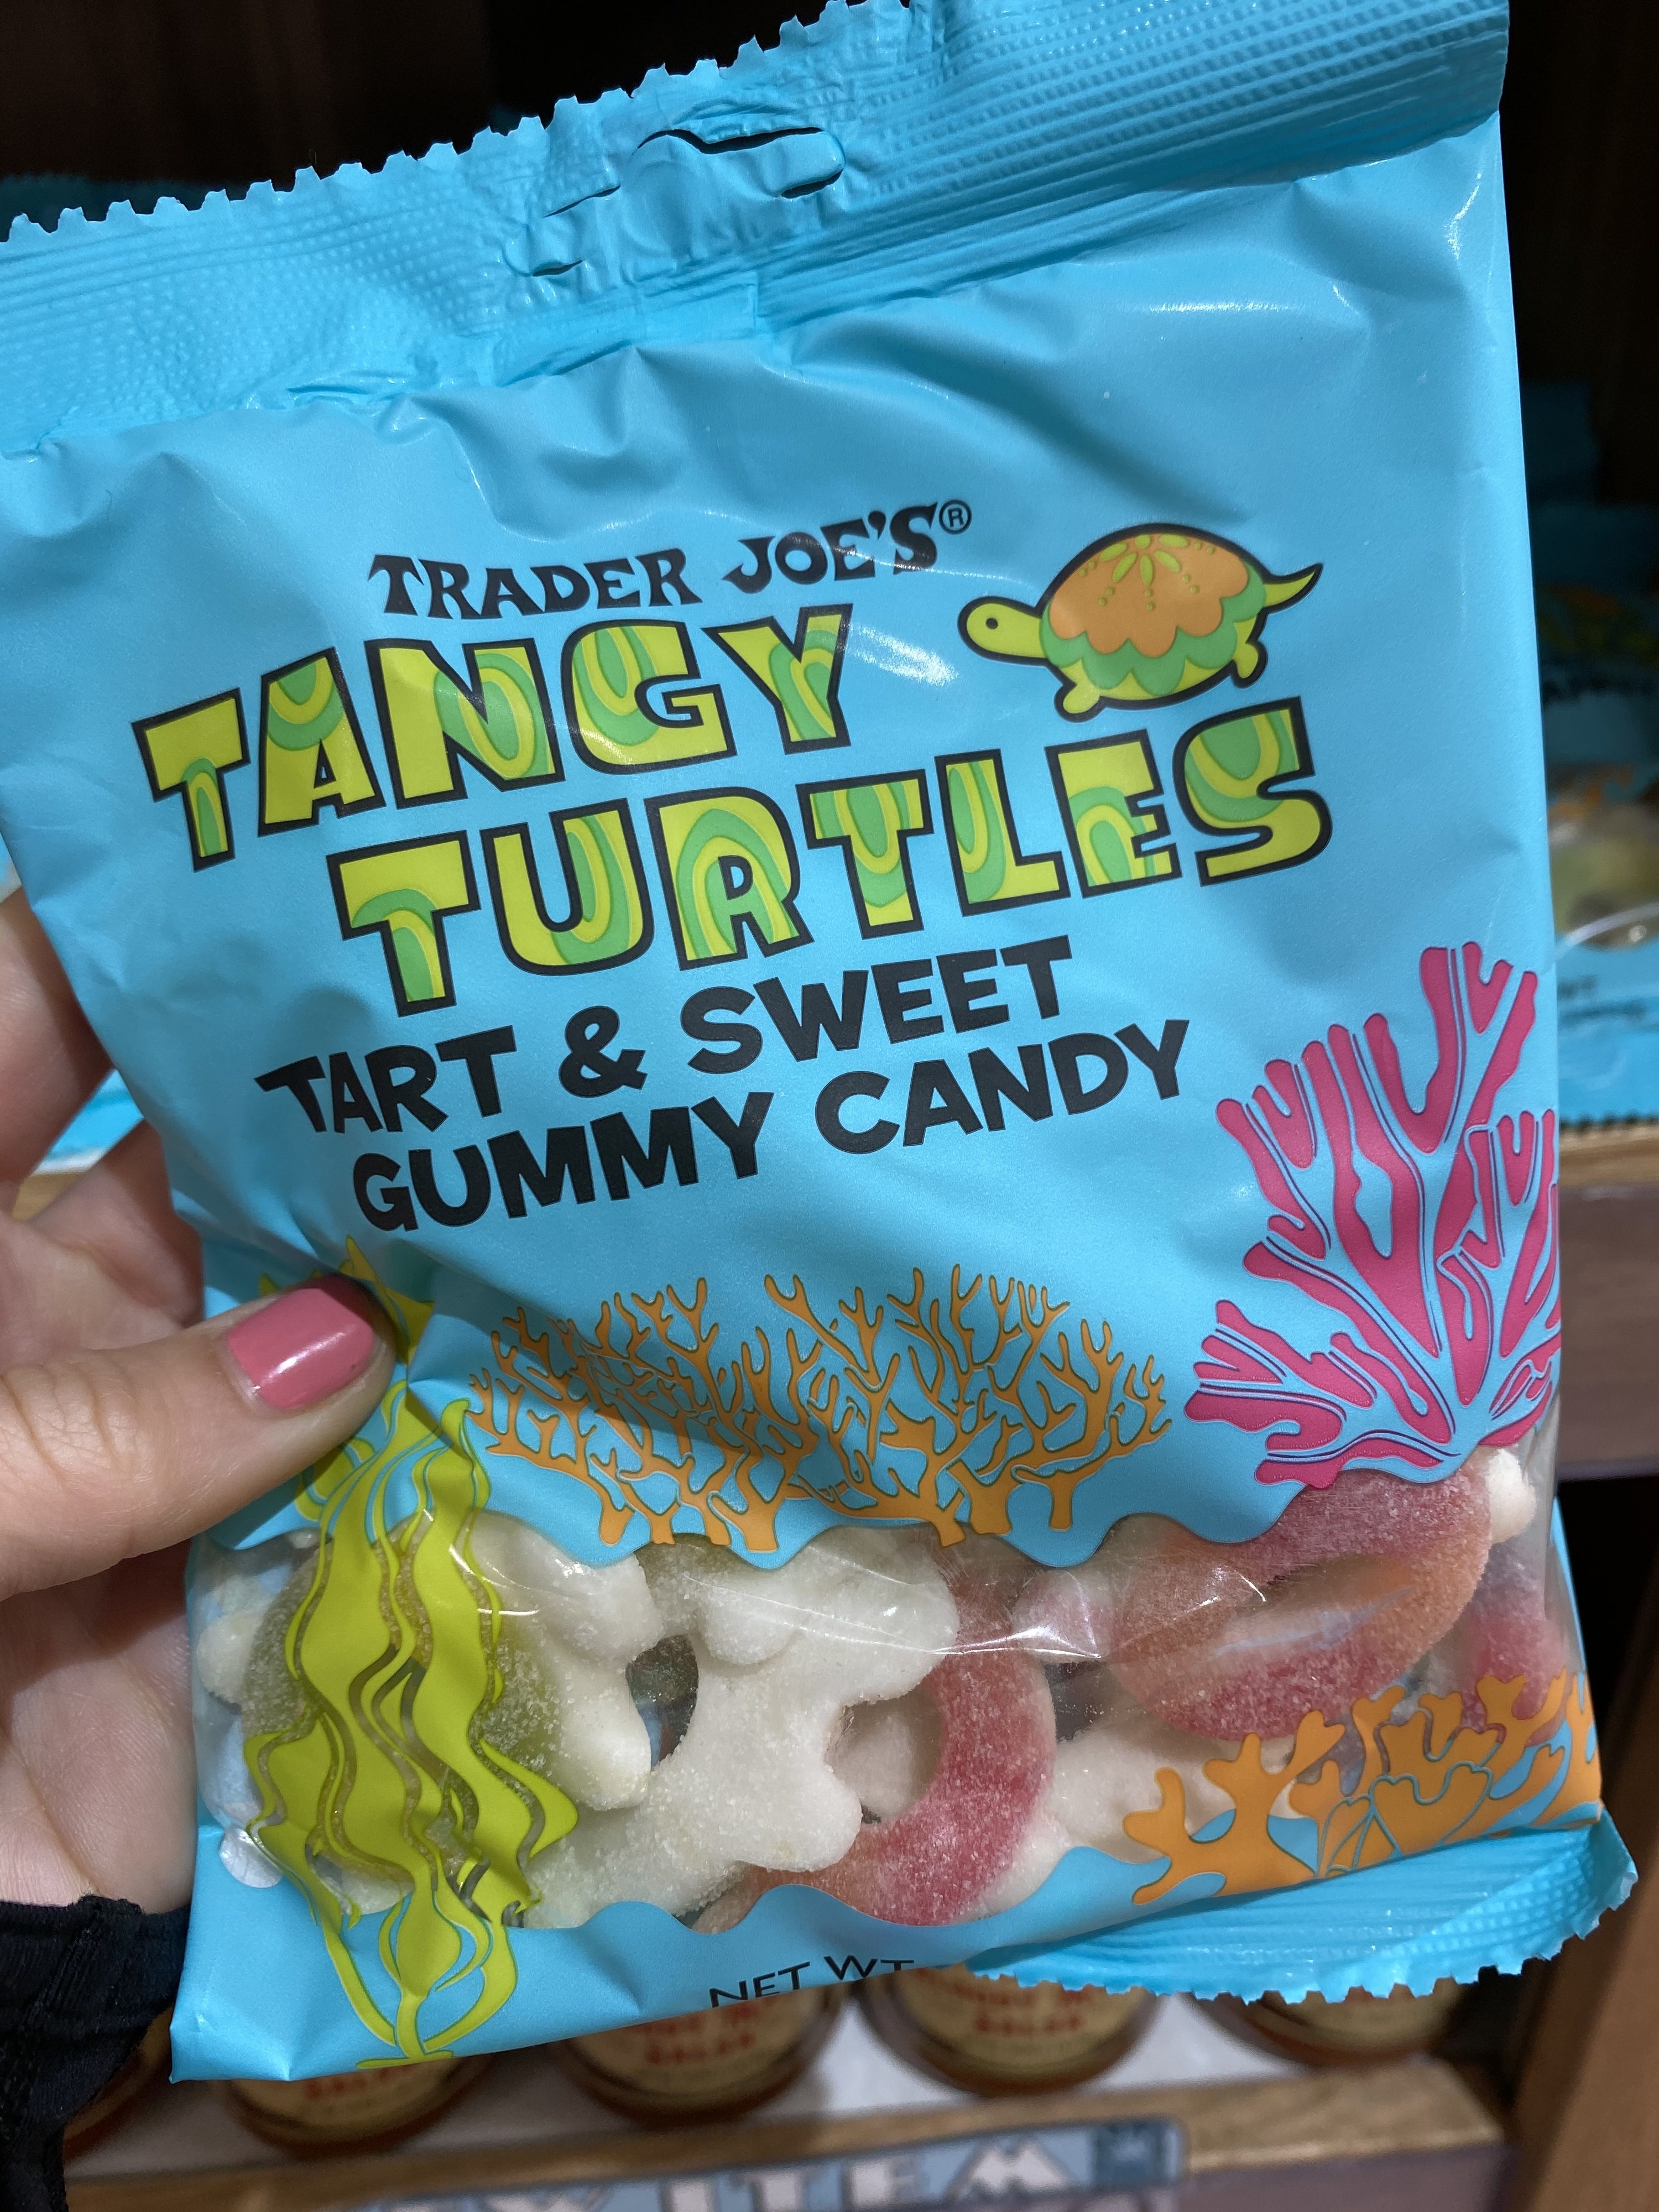 A bag of tart and sweet gummy turtles.